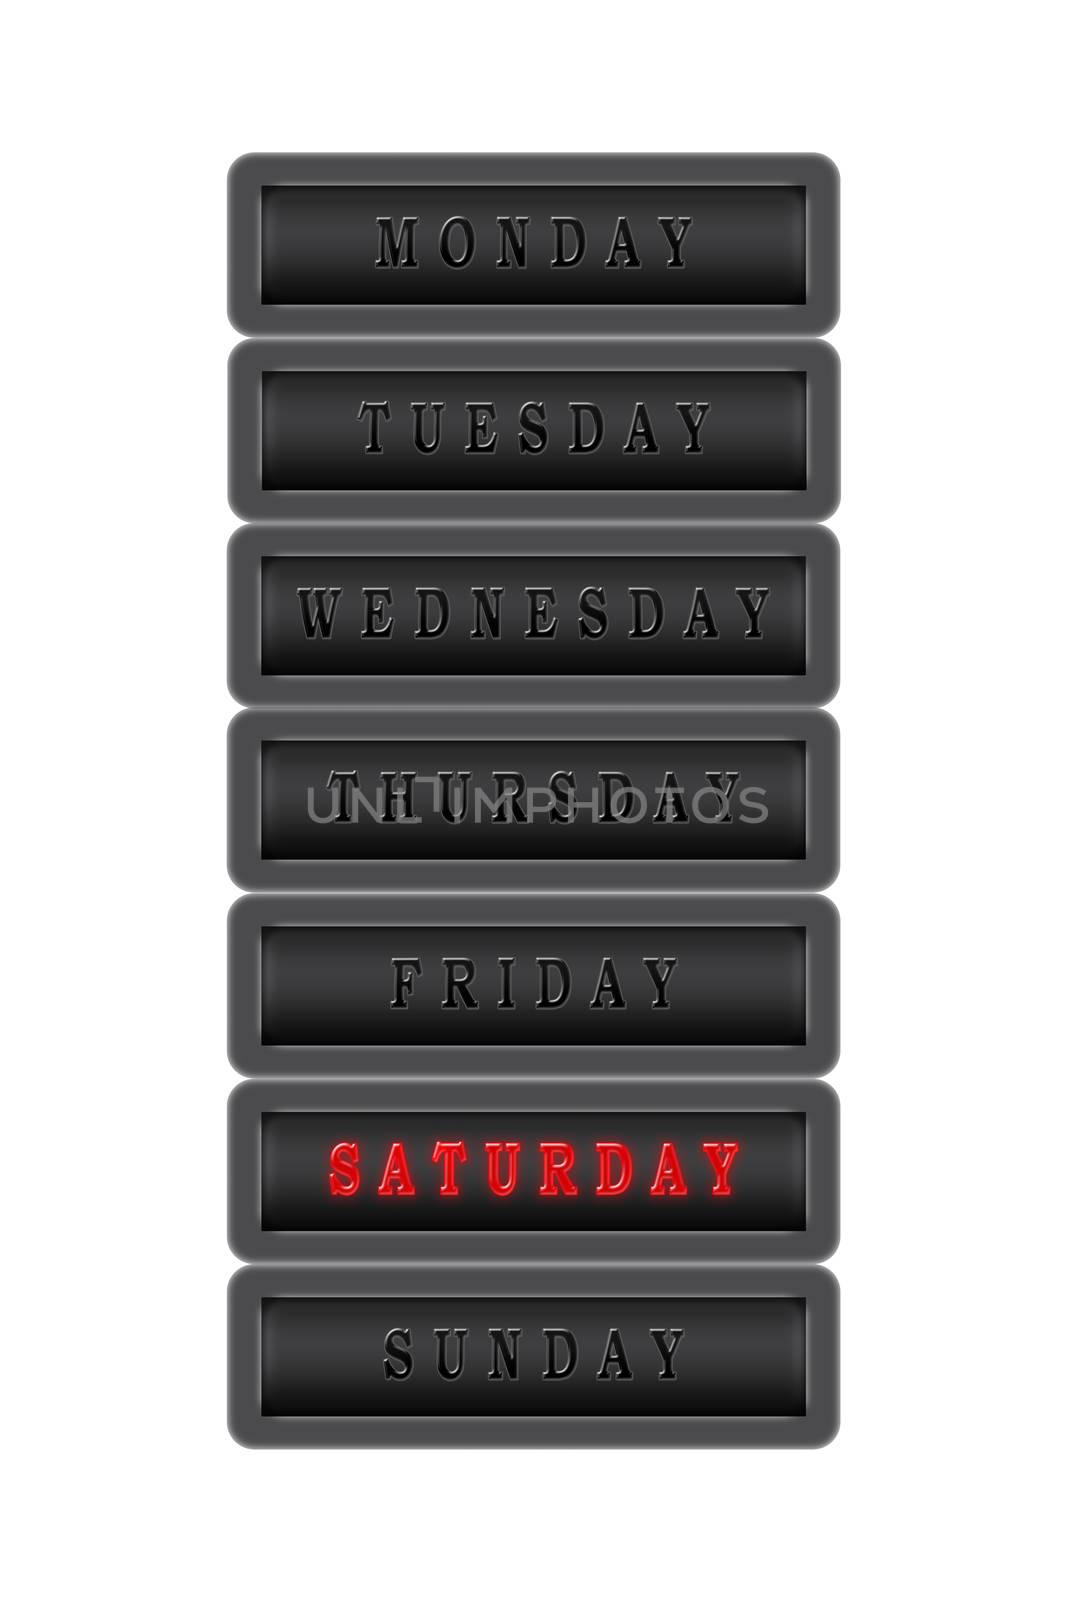 In the days of the week list, Saturday is highlighted in red on  by Grommik